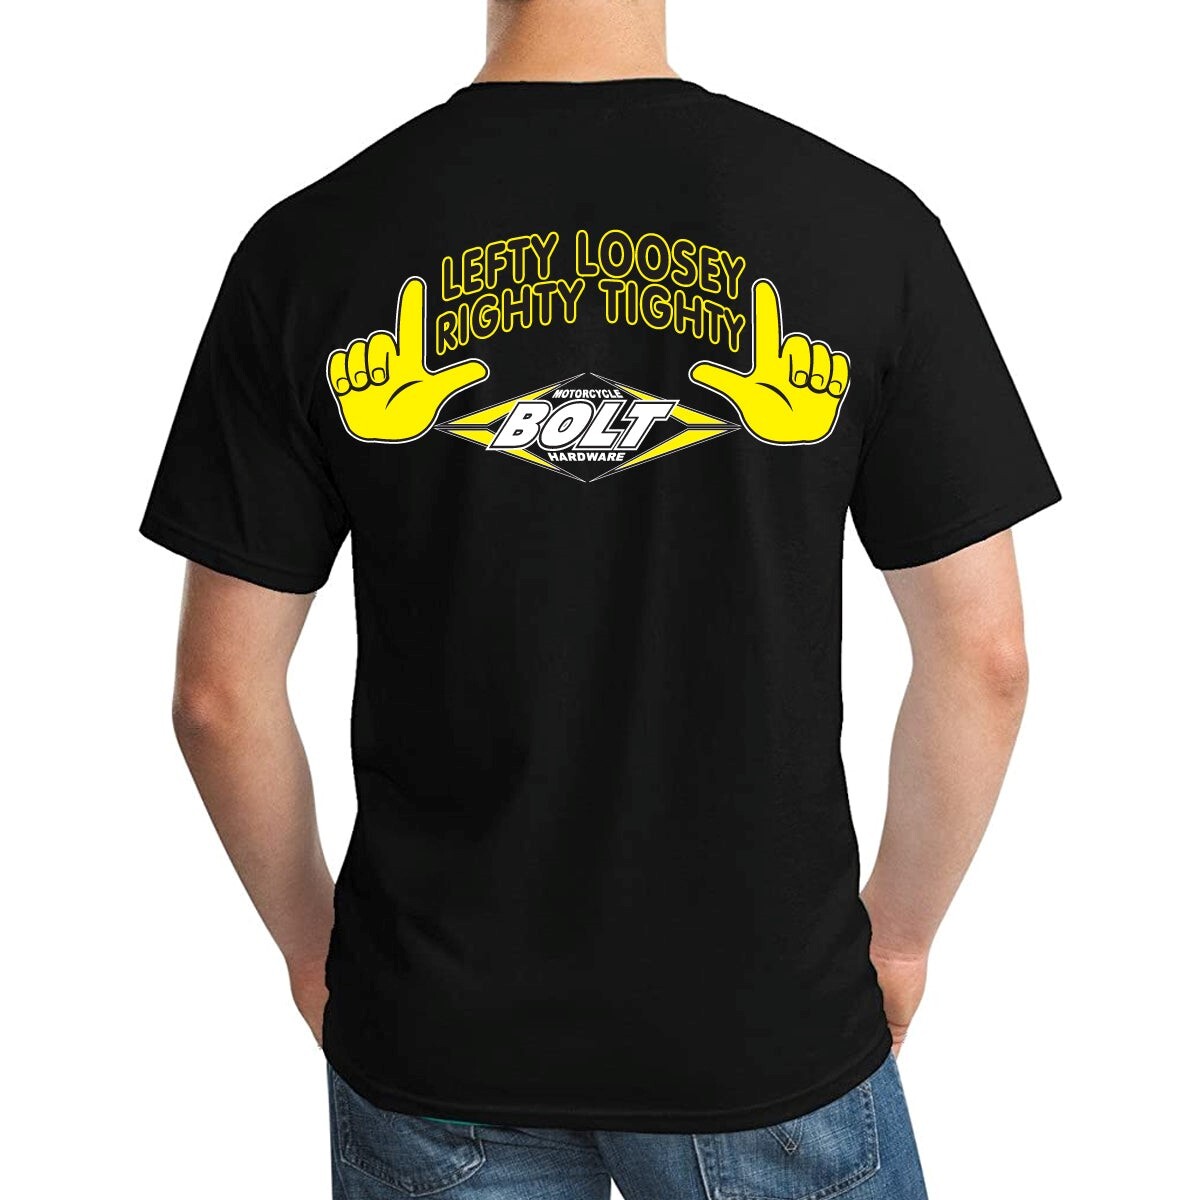 LEFTY LOOSEY, RIGHTY TIGHTY T SHIRT BLACK EXTRA LARGE - Bolt Motorcycle ...